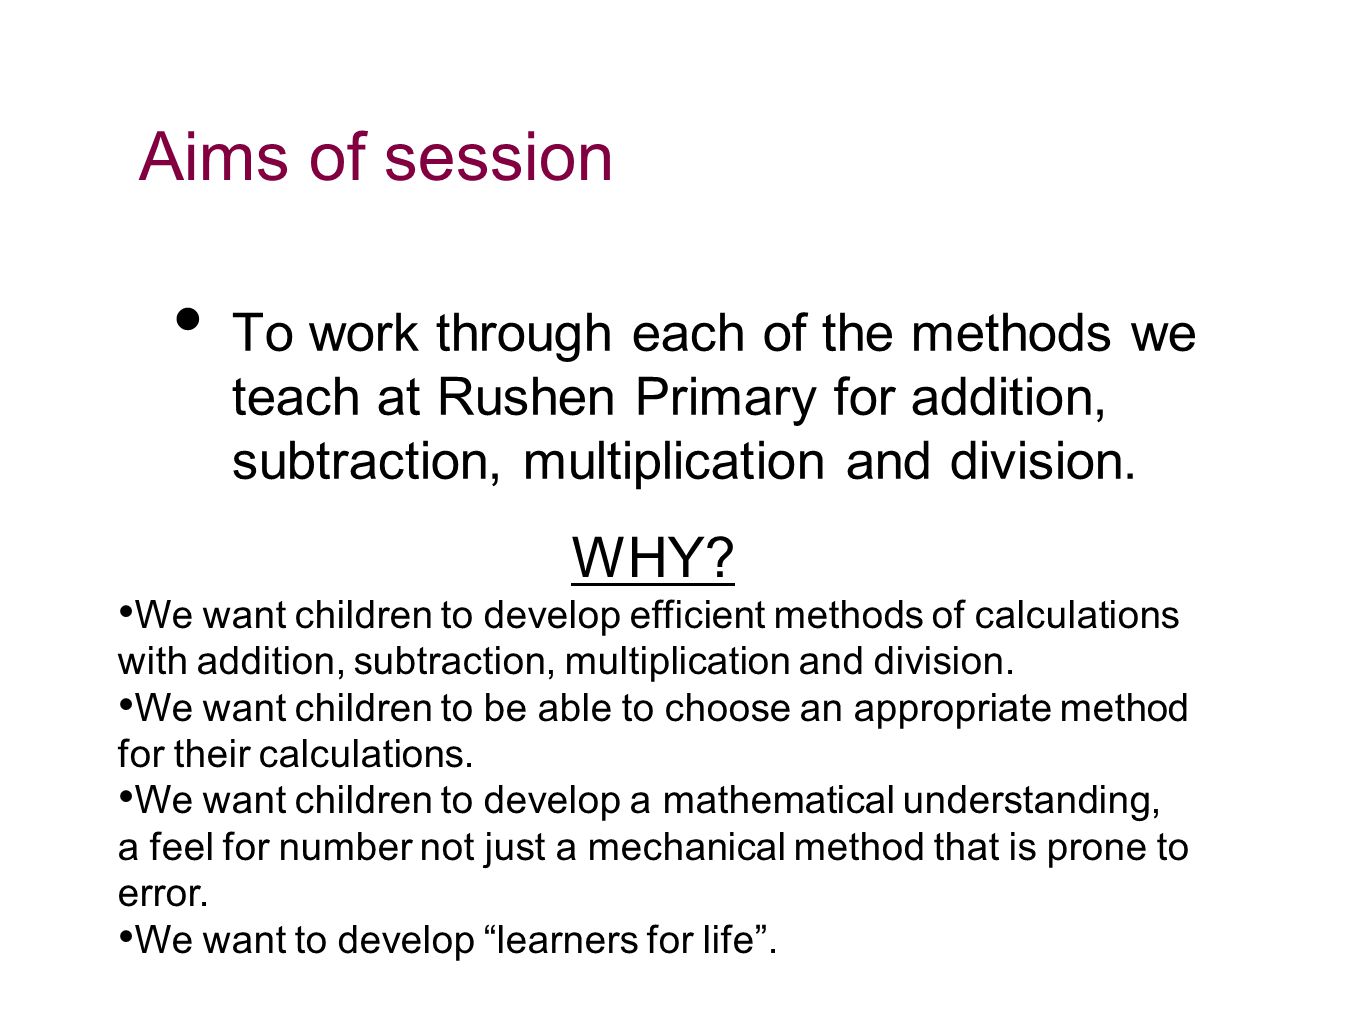 Aims of session To work through each of the methods we teach at Rushen Primary for addition, subtraction, multiplication and division.